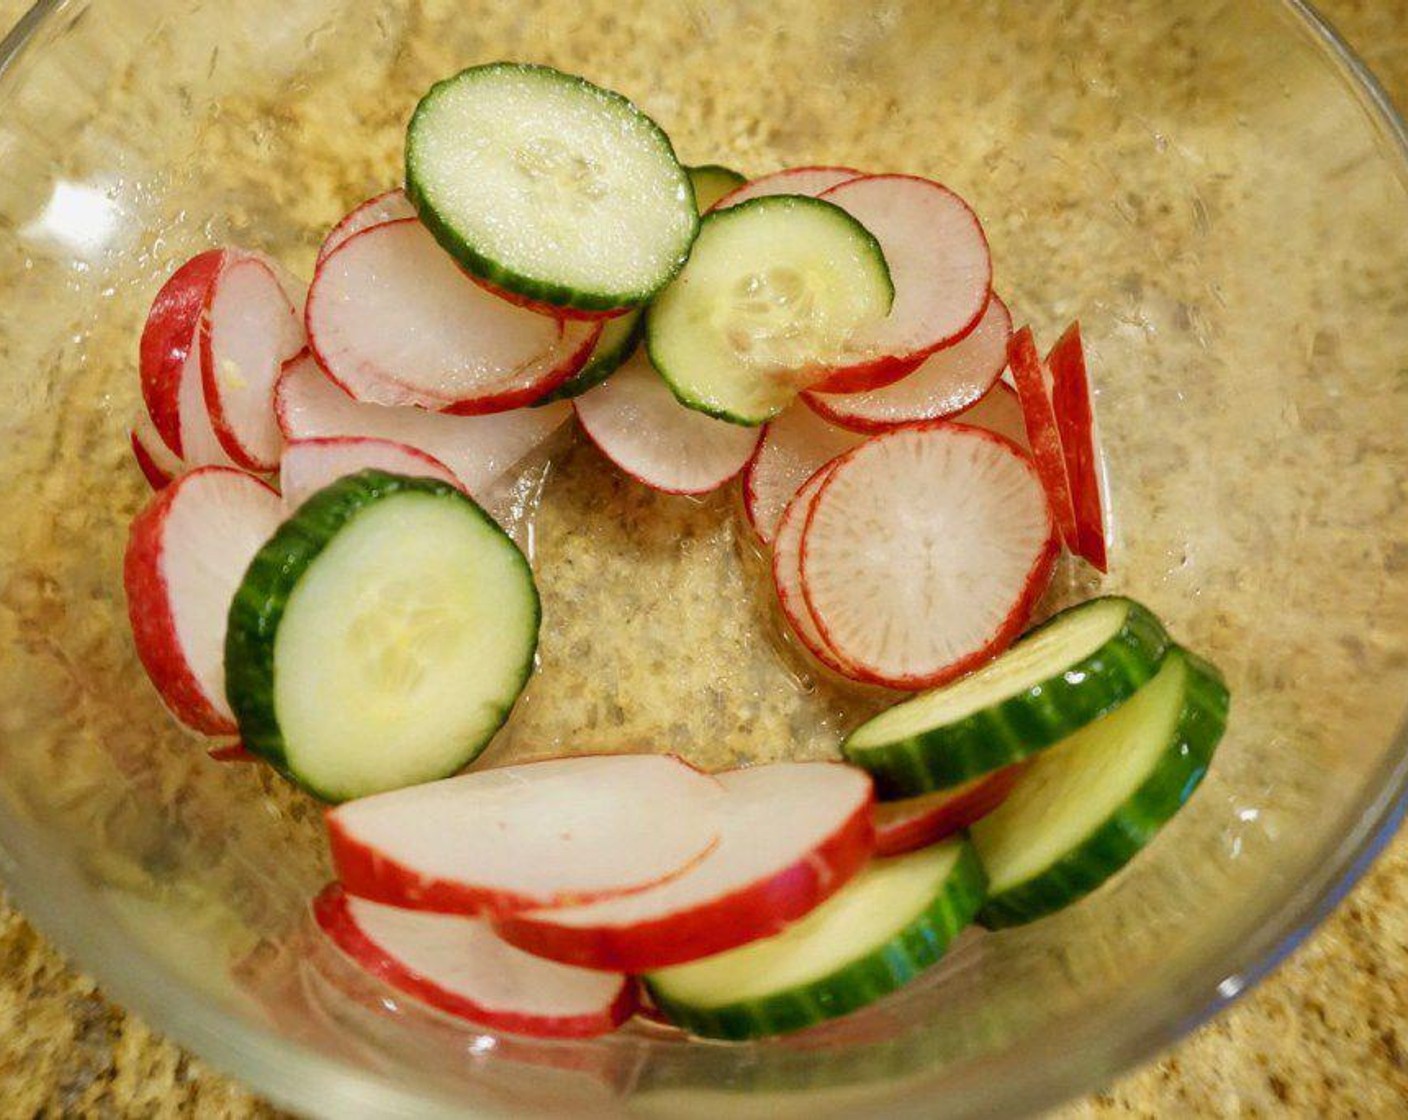 step 1 Combine Radish (1 bunch) and English Cucumber (1/2) in a bowl with the juice from Lemon (1), Granulated Sugar (1 tsp), and Sea Salt (1/2 tsp). Let sit while you prepare the rest of the salad to soak up the juices.